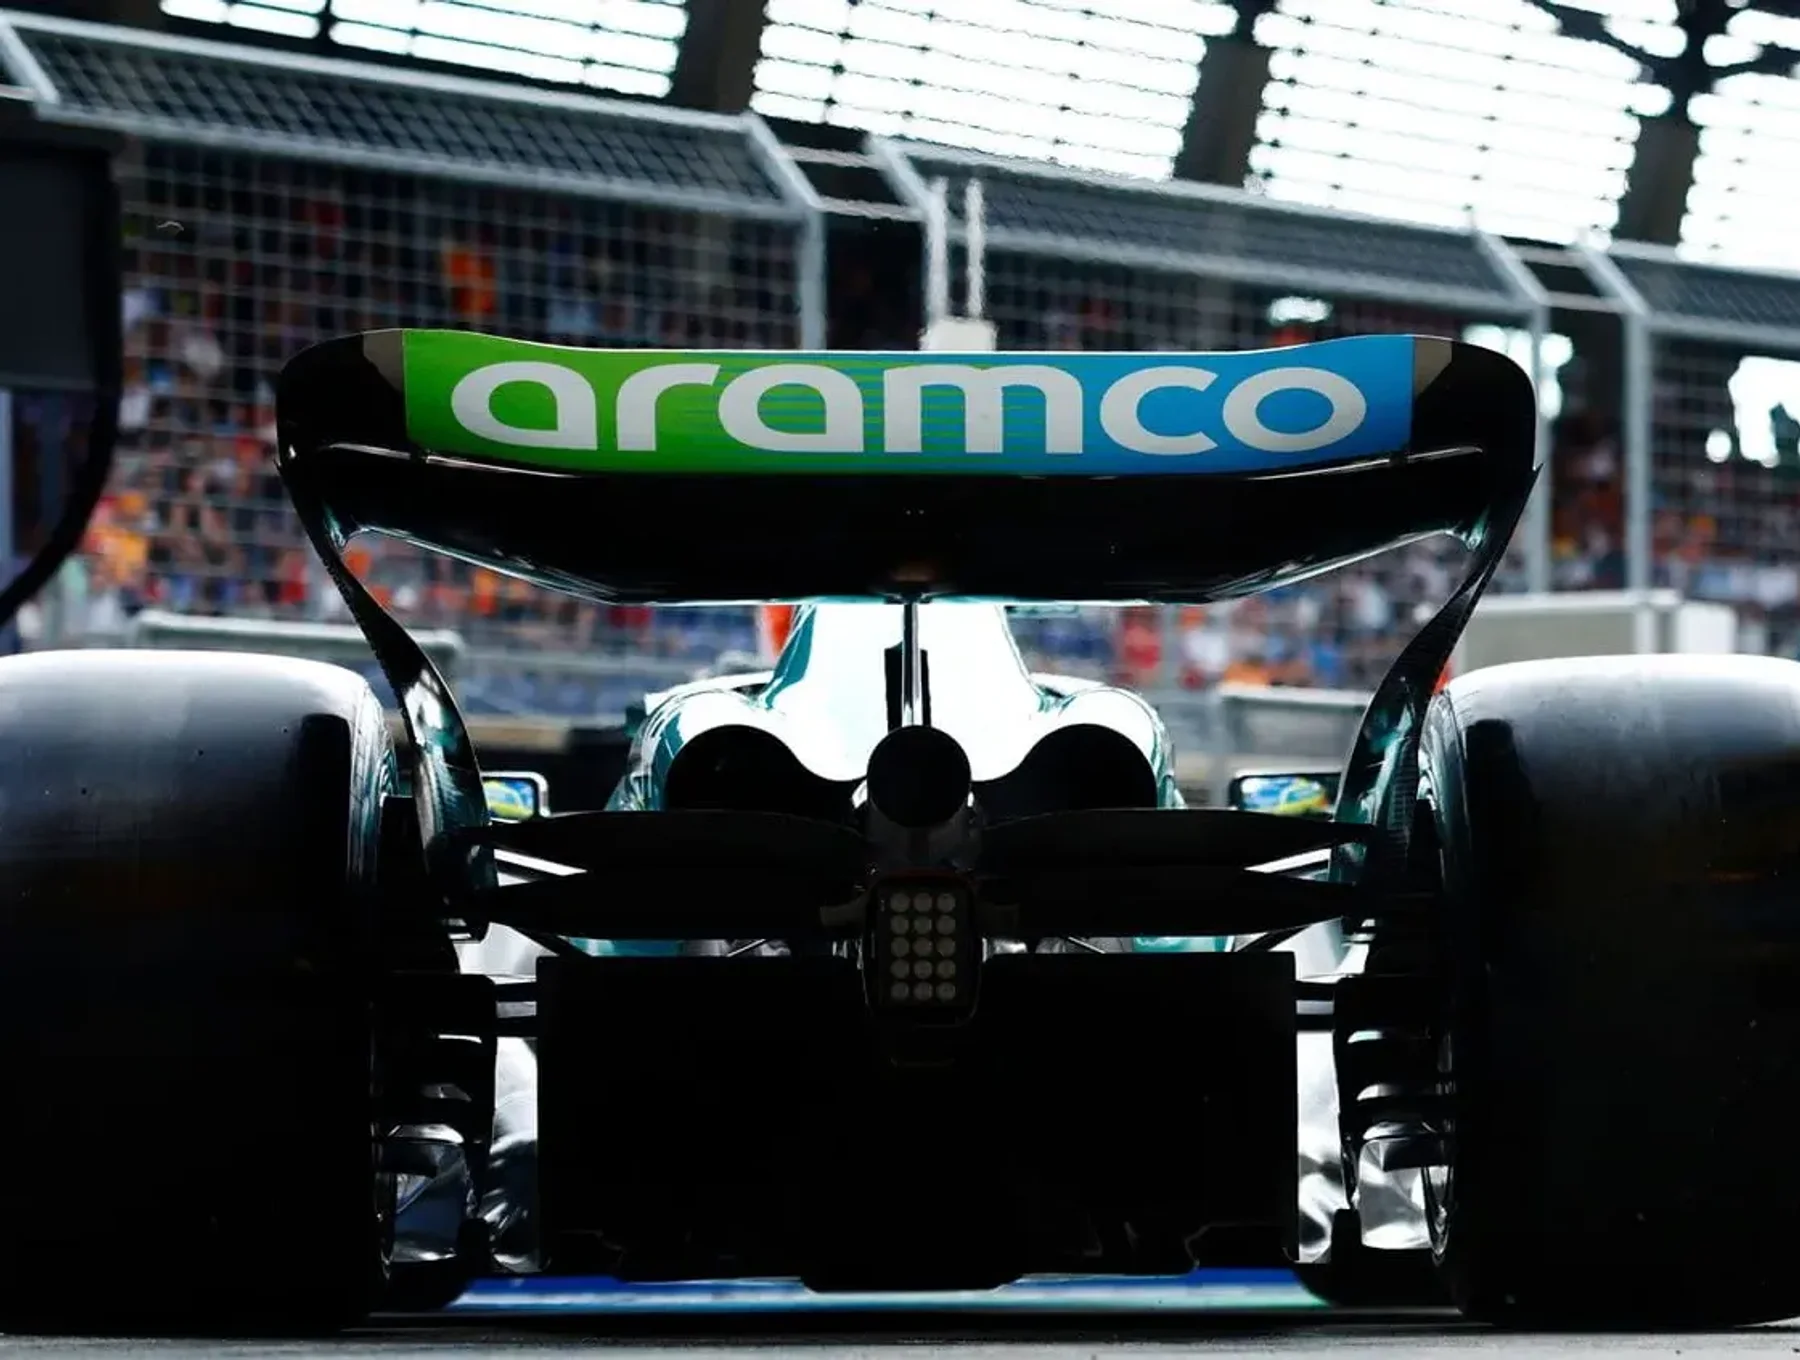 What Engine Does Aston Martin Use in F1 Racing?